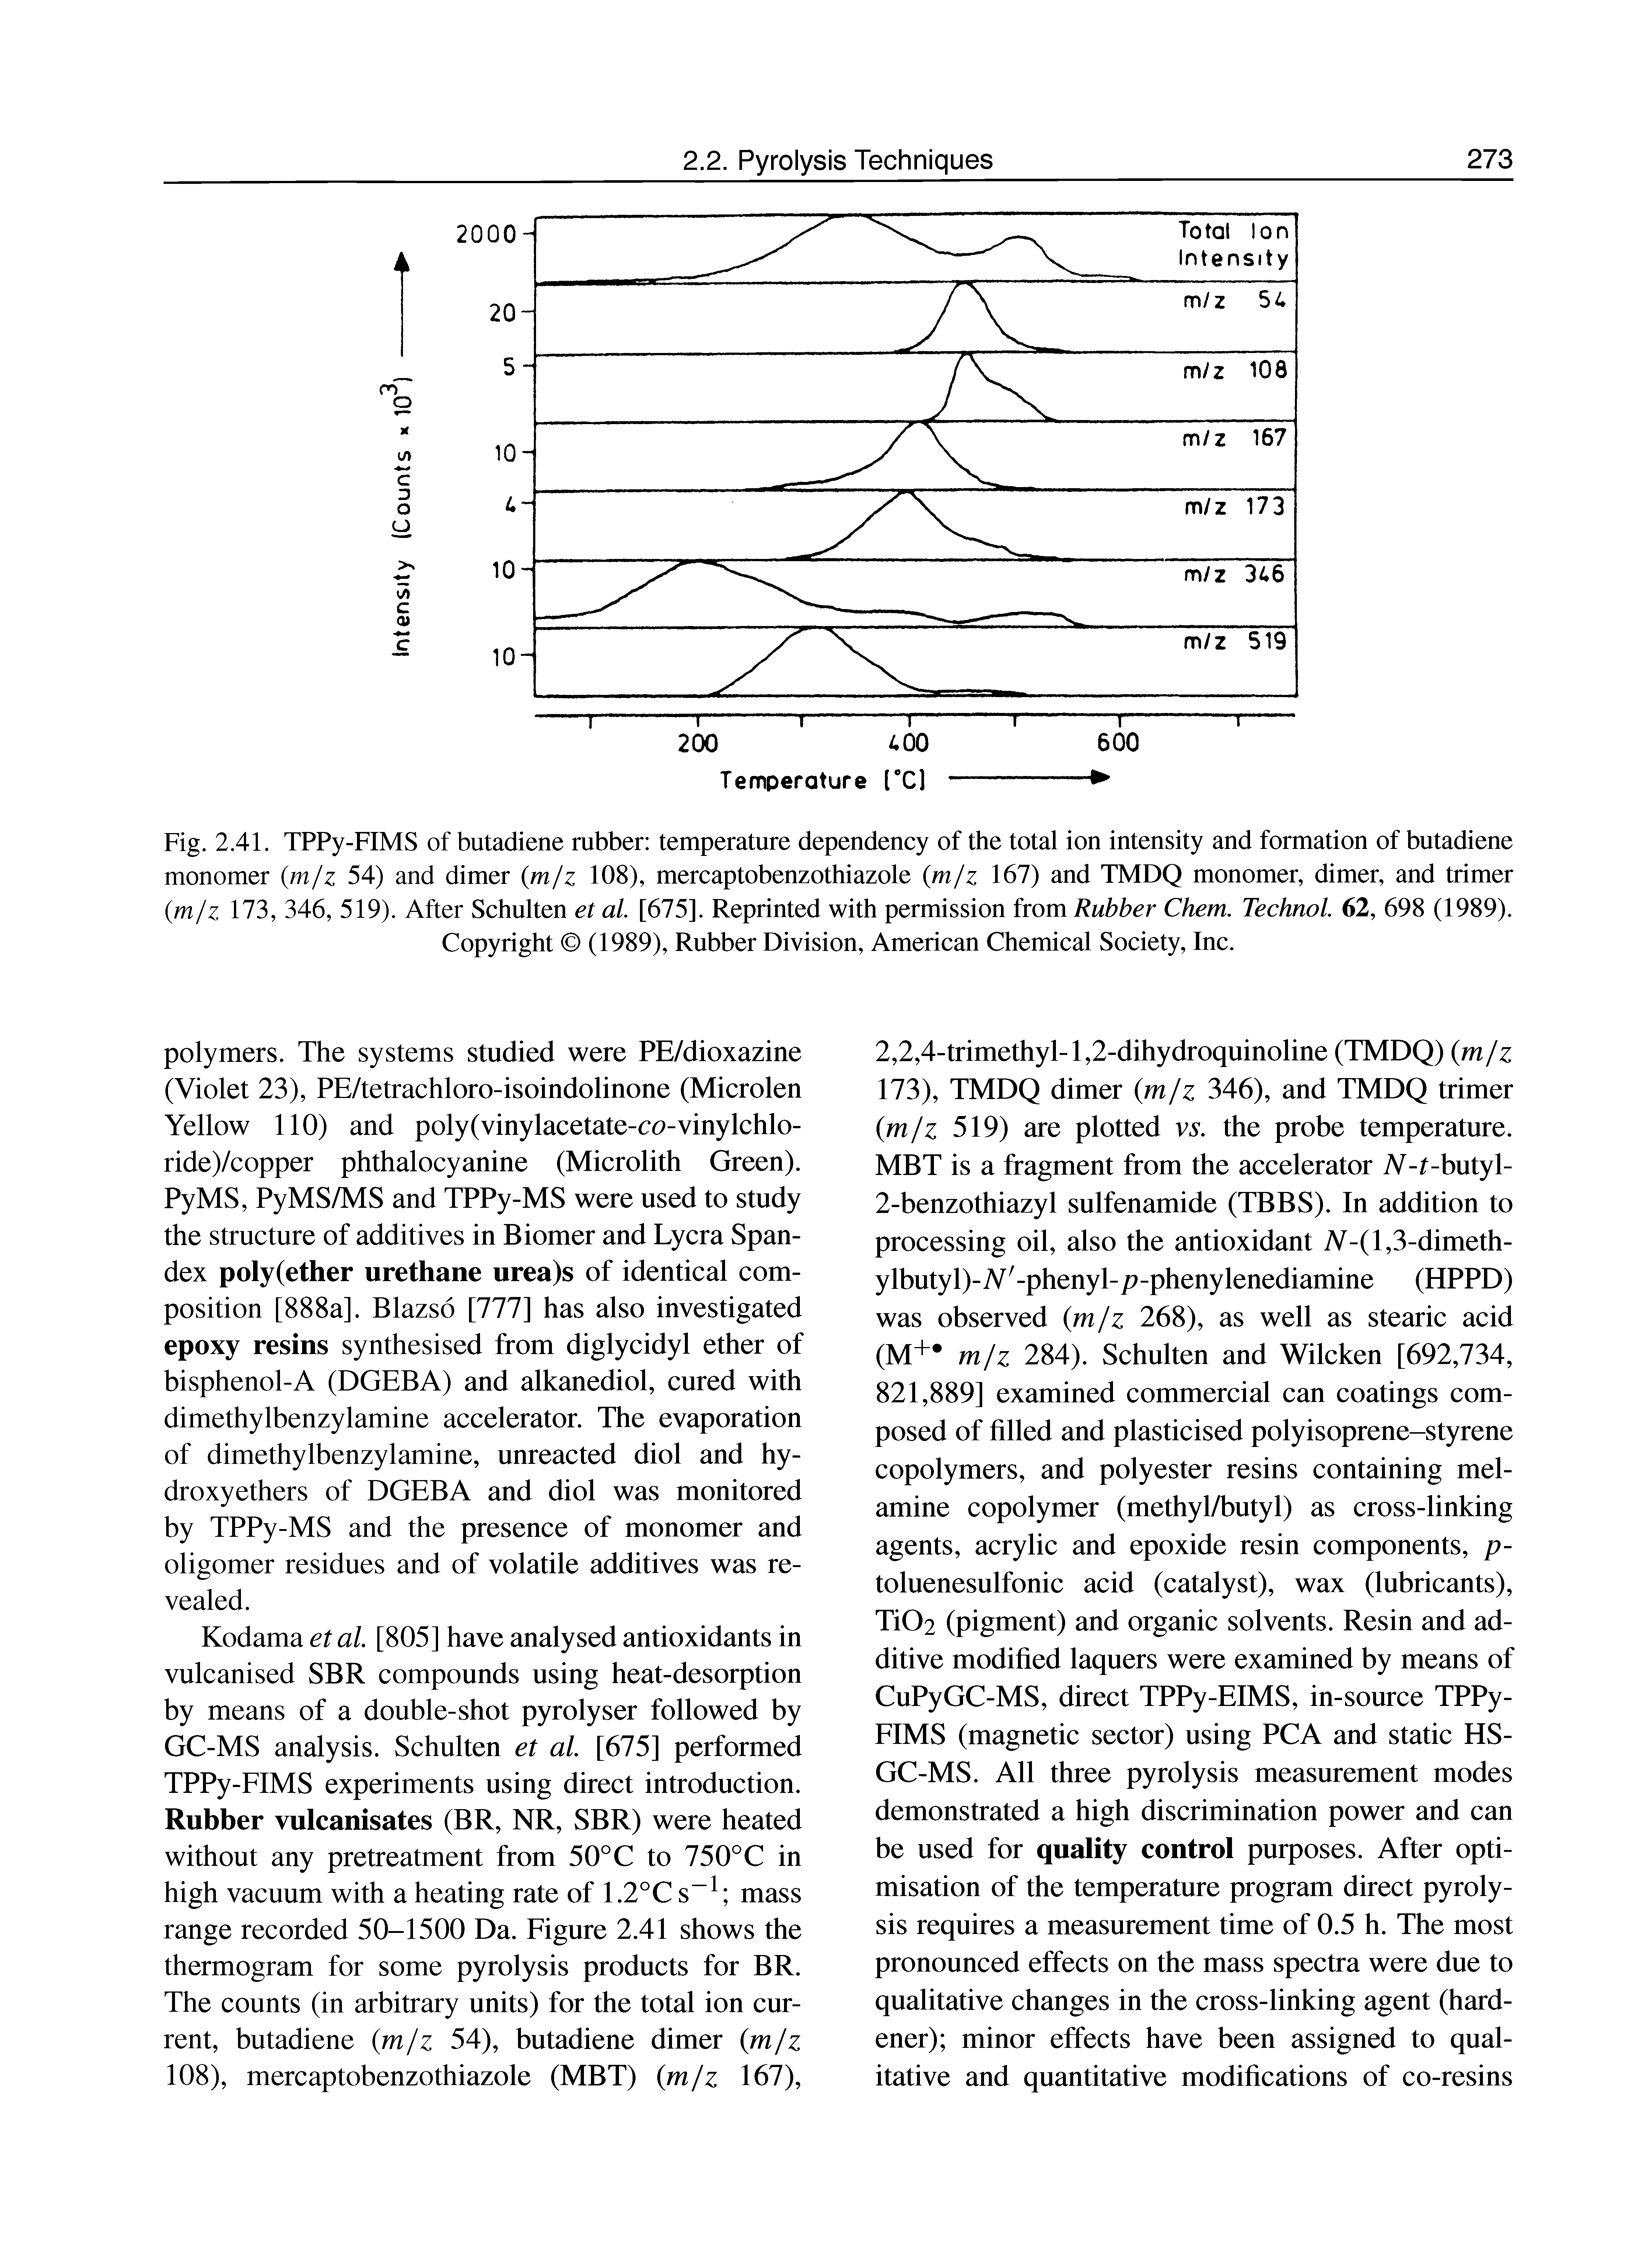 Fig. 2.41. TPPy-FIMS of butadiene rubber temperature dependency of the total ion intensity and formation of butadiene monomer (m/z 54) and dimer (m/z 108), mercaptobenzothiazole (m/z 167) and TMDQ monomer, dimer, and trimer (m/z 173, 346, 519). After Schulten et al [675]. Reprinted with permission from Rubber Chem. Technol 62, 698 (1989). Copyright (1989), Rubber Division, American Chemical Society, Inc.